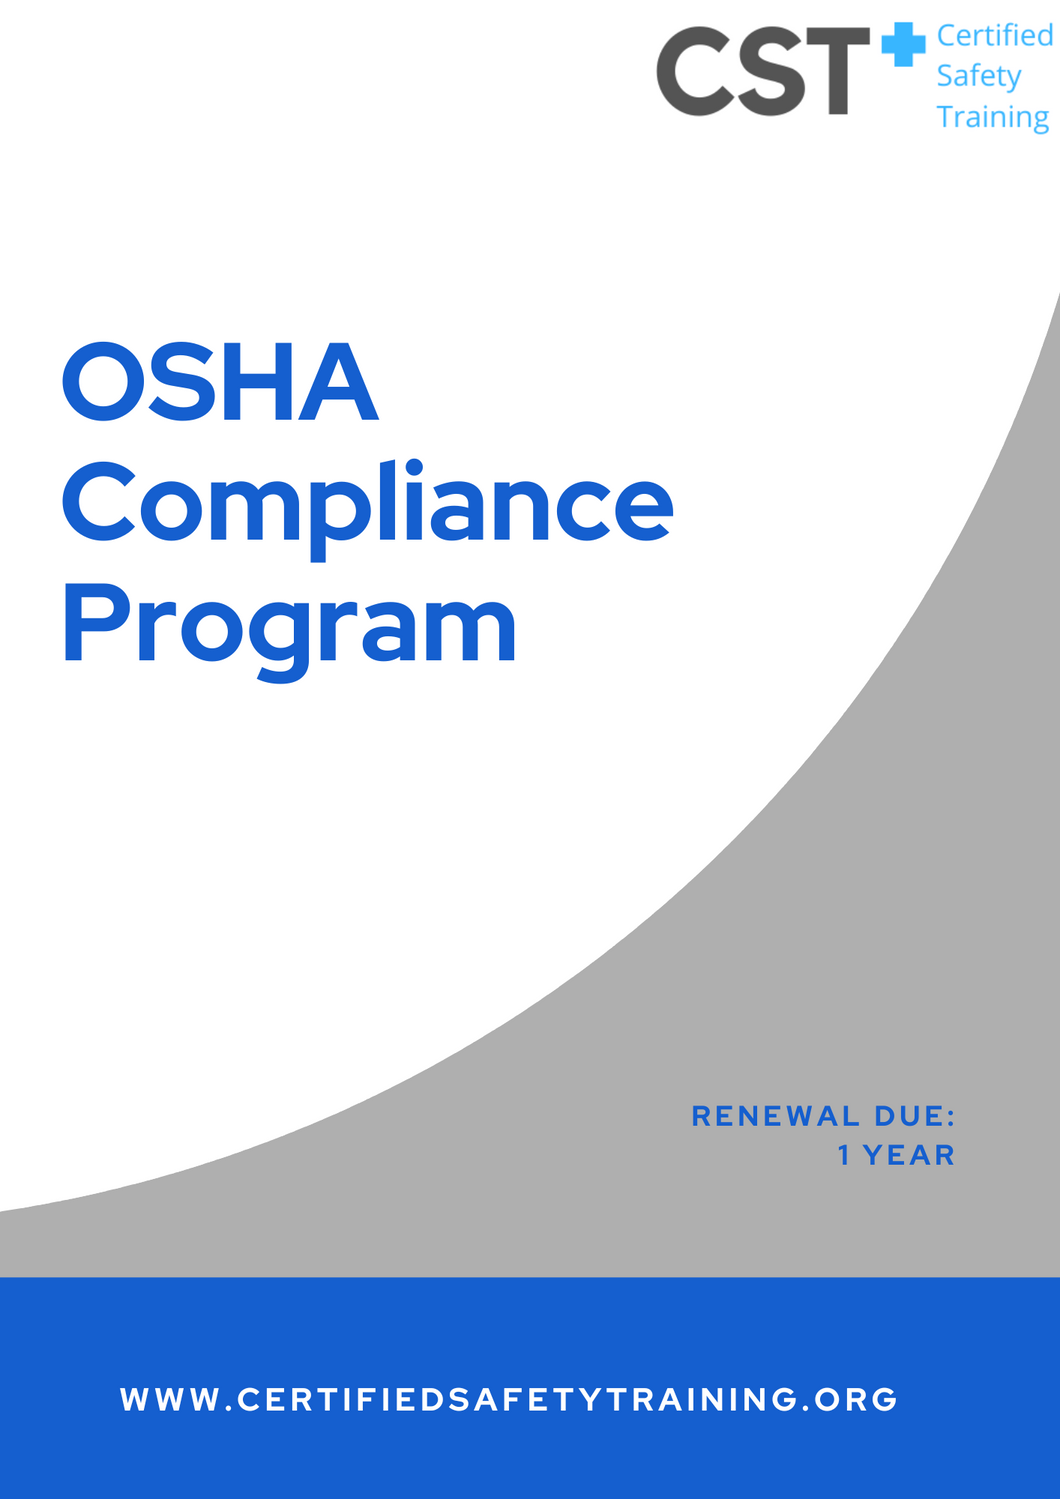 Complete OSHA Compliance for Monument Companies